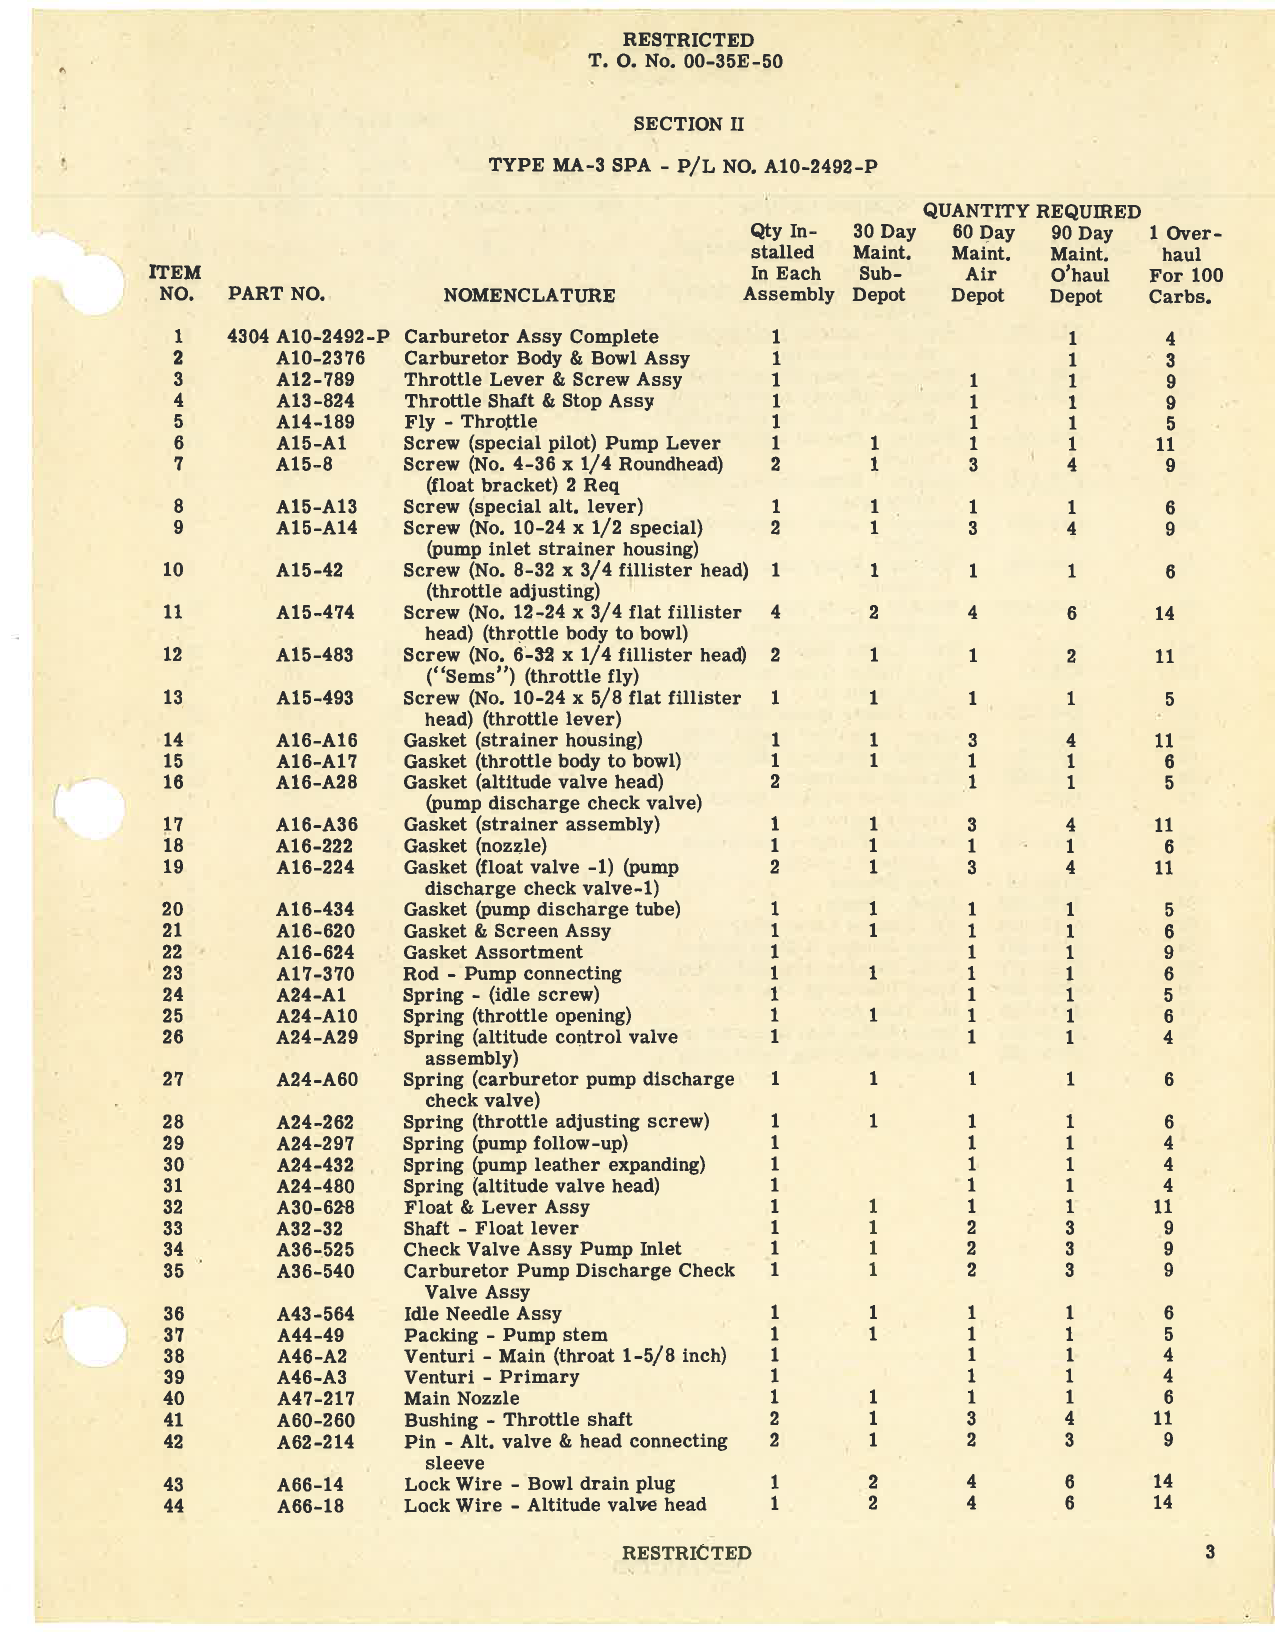 Sample page 5 from AirCorps Library document: Table of Credit - Maintenance & Overhaul Parts for Marvel Schebler Carburetors